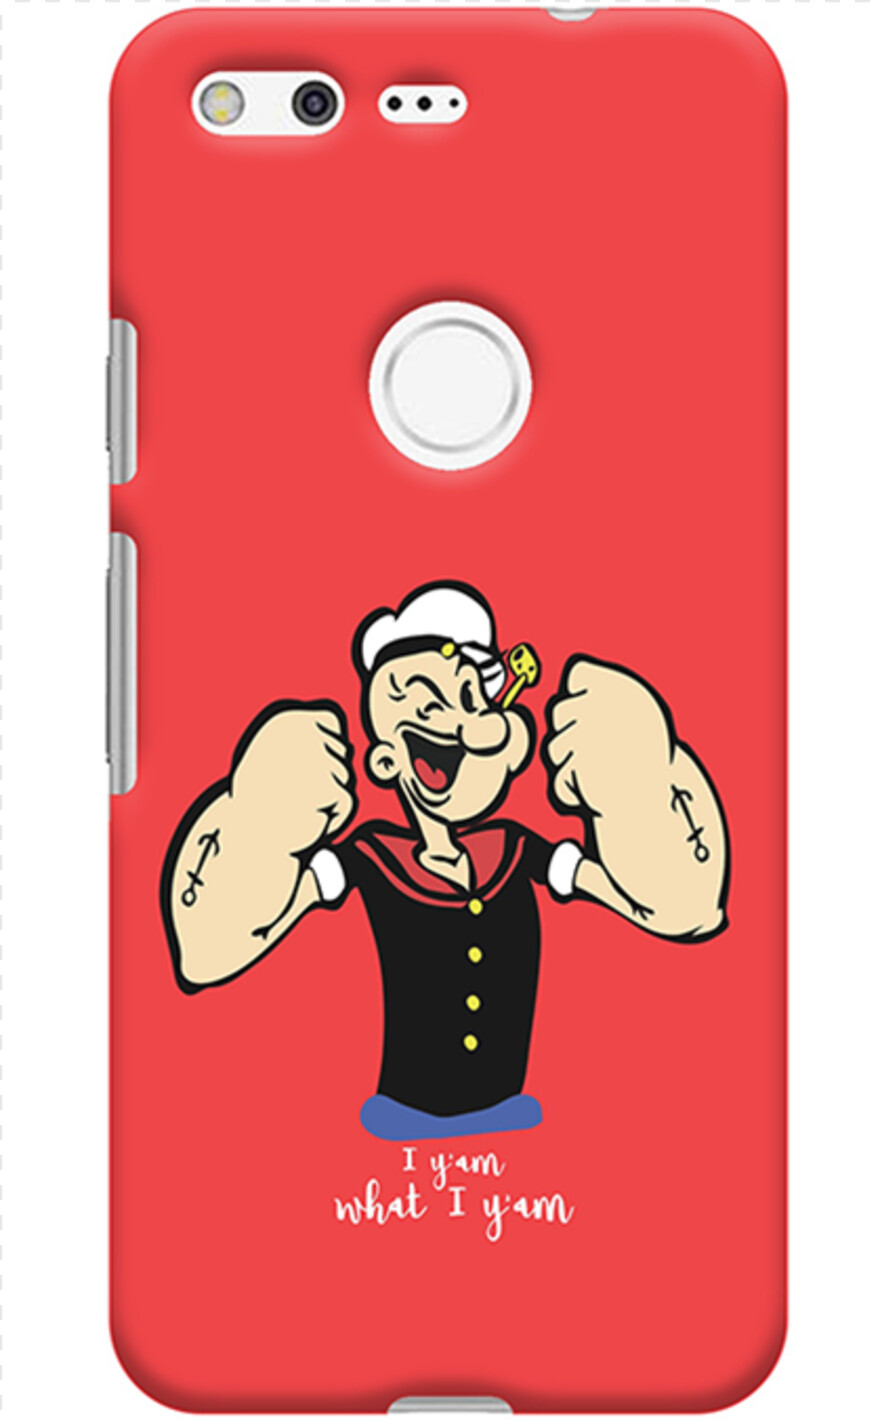 mobile-phone-clipart # 1052932